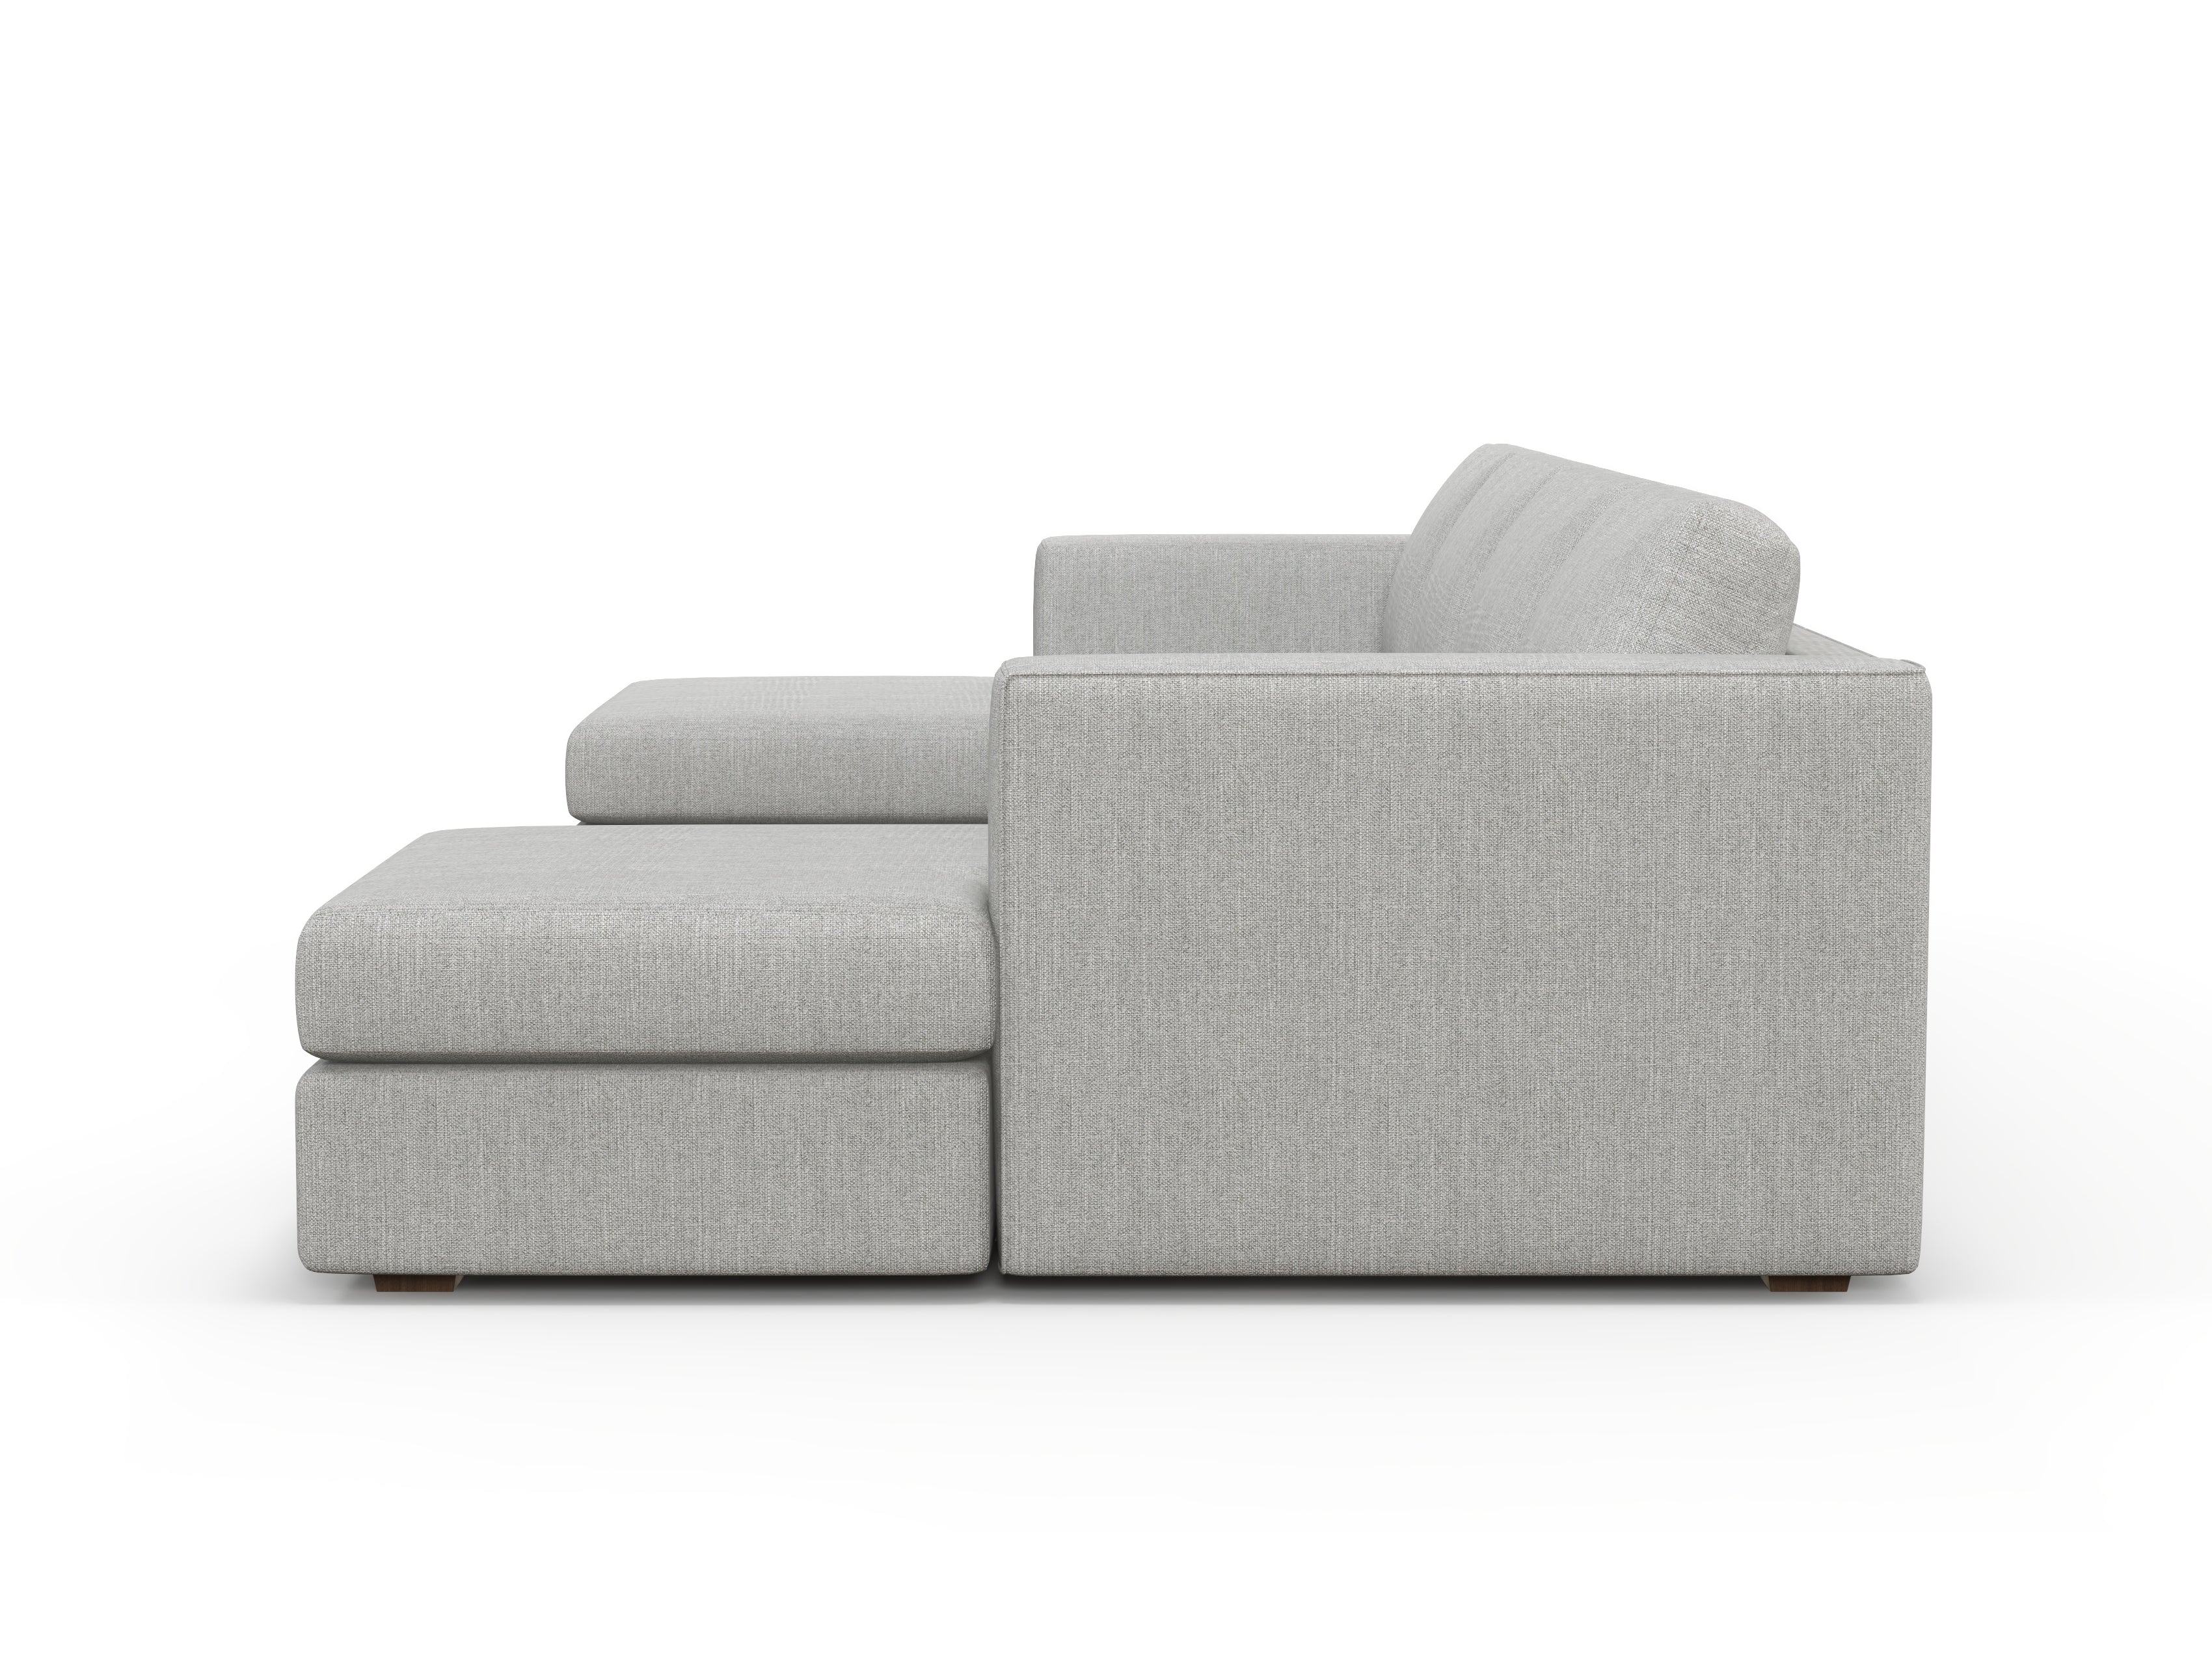 Lounge Comfy Double Chaise Sectional Sofa